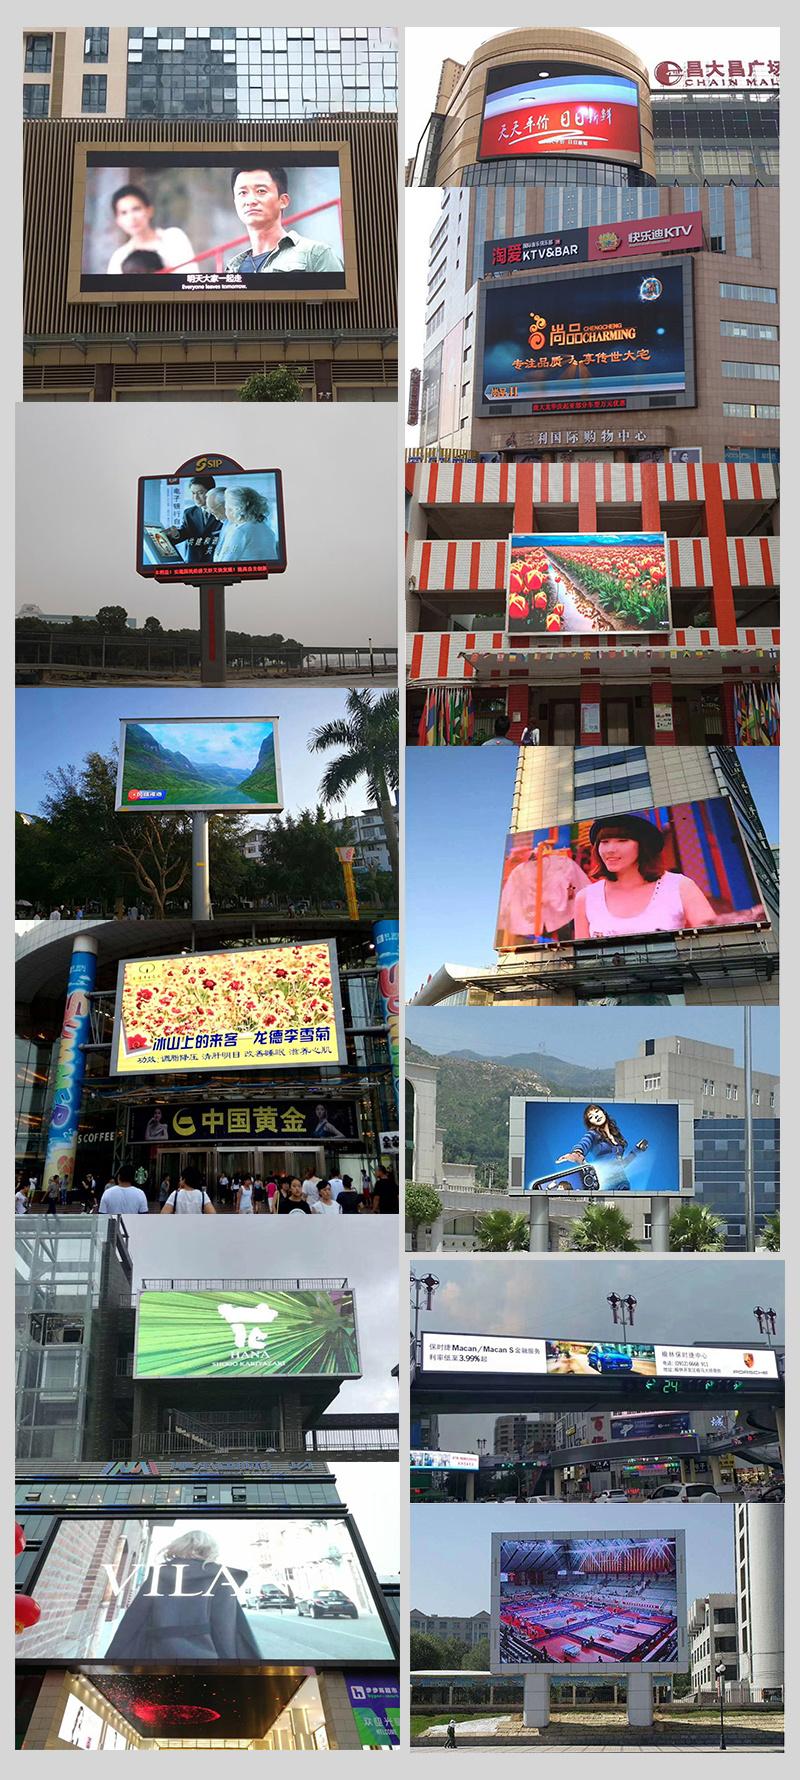 HD New Design Outdoor P2.5 P3 P4 P5 P6 P8 P10 Full Color Stage Use Publicity Screen Rental Advertising Equipment LED Outdoor Screen Price